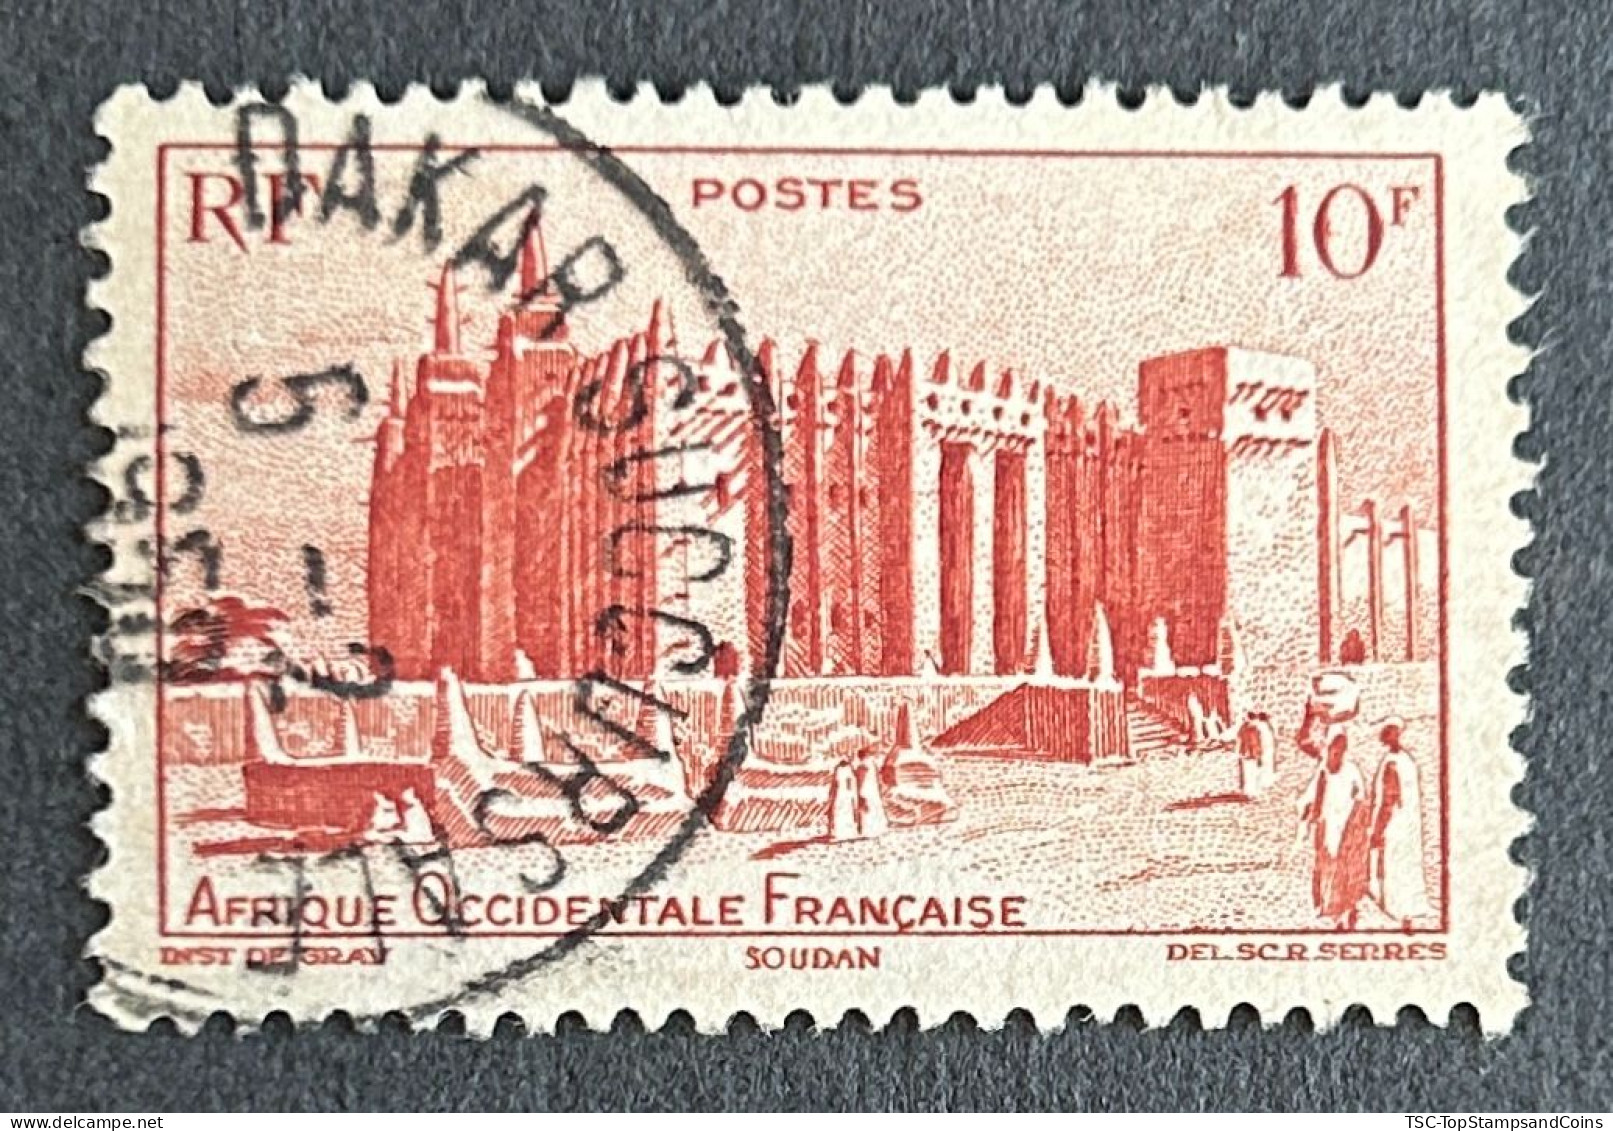 FRAWA0039U2 - Local Motives - Djenné Mosque - French Sudan - 10 F Used Stamp - AOF - 1947 - Oblitérés